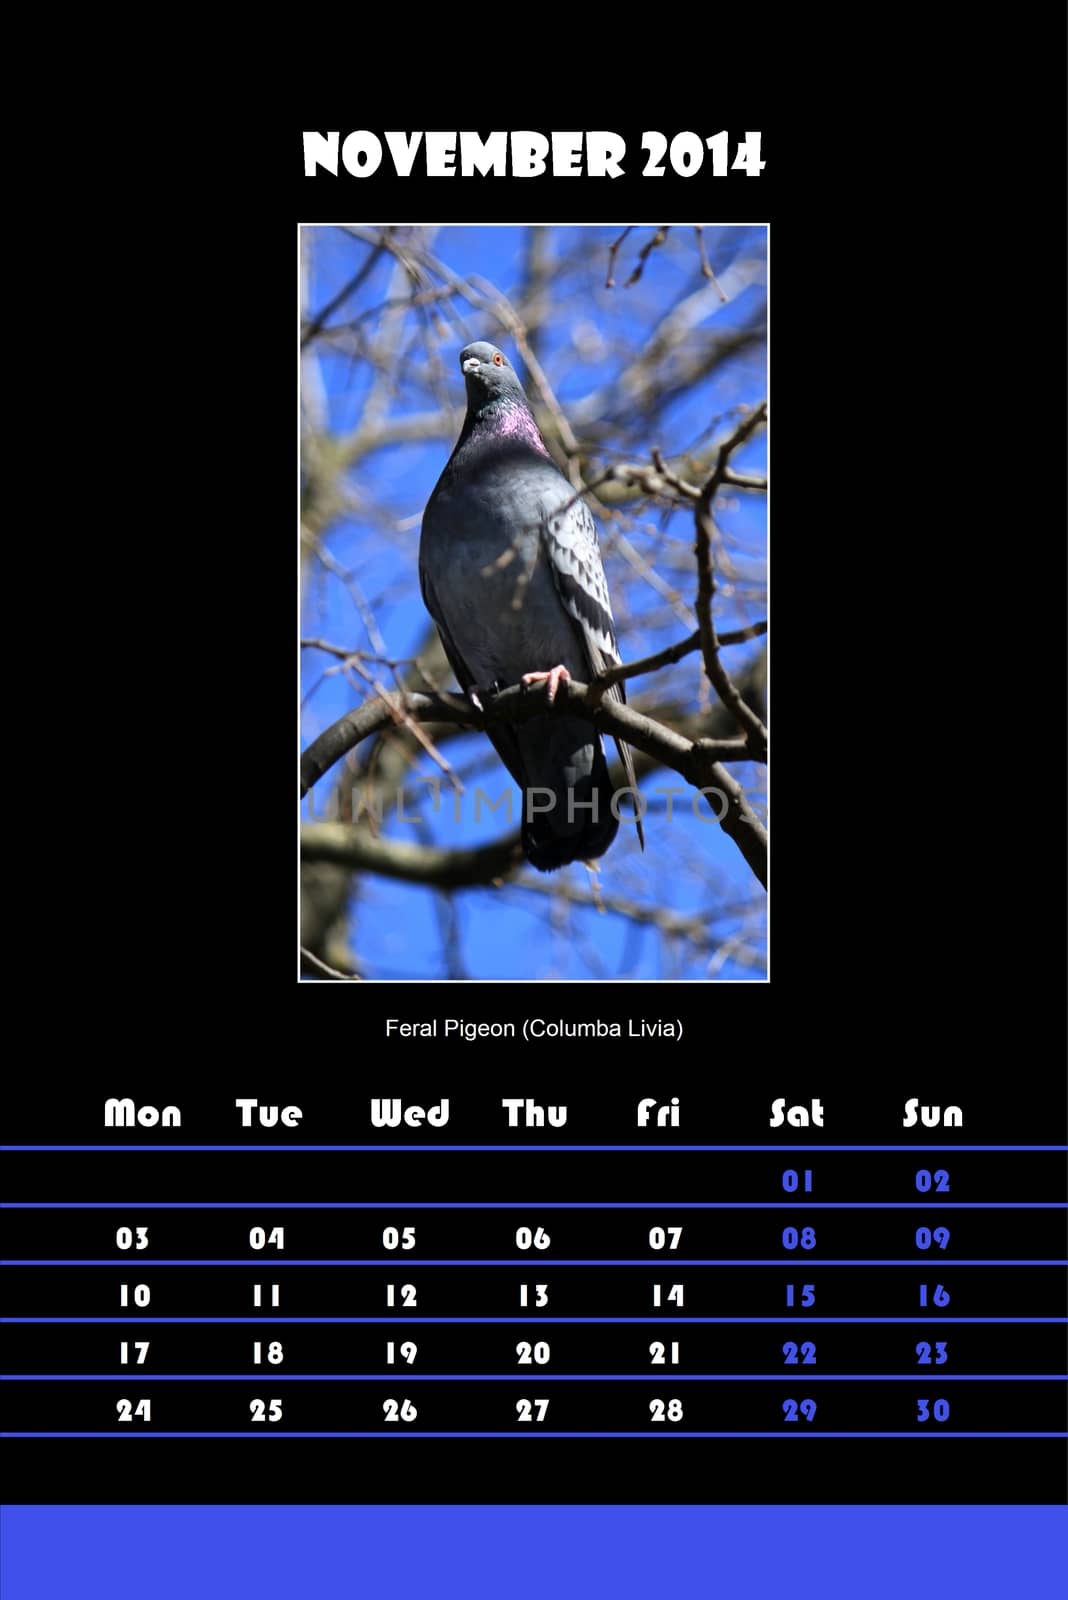 Colorful english bird calendar for november 2014 in black background, feral pigeon (columba livia) picture